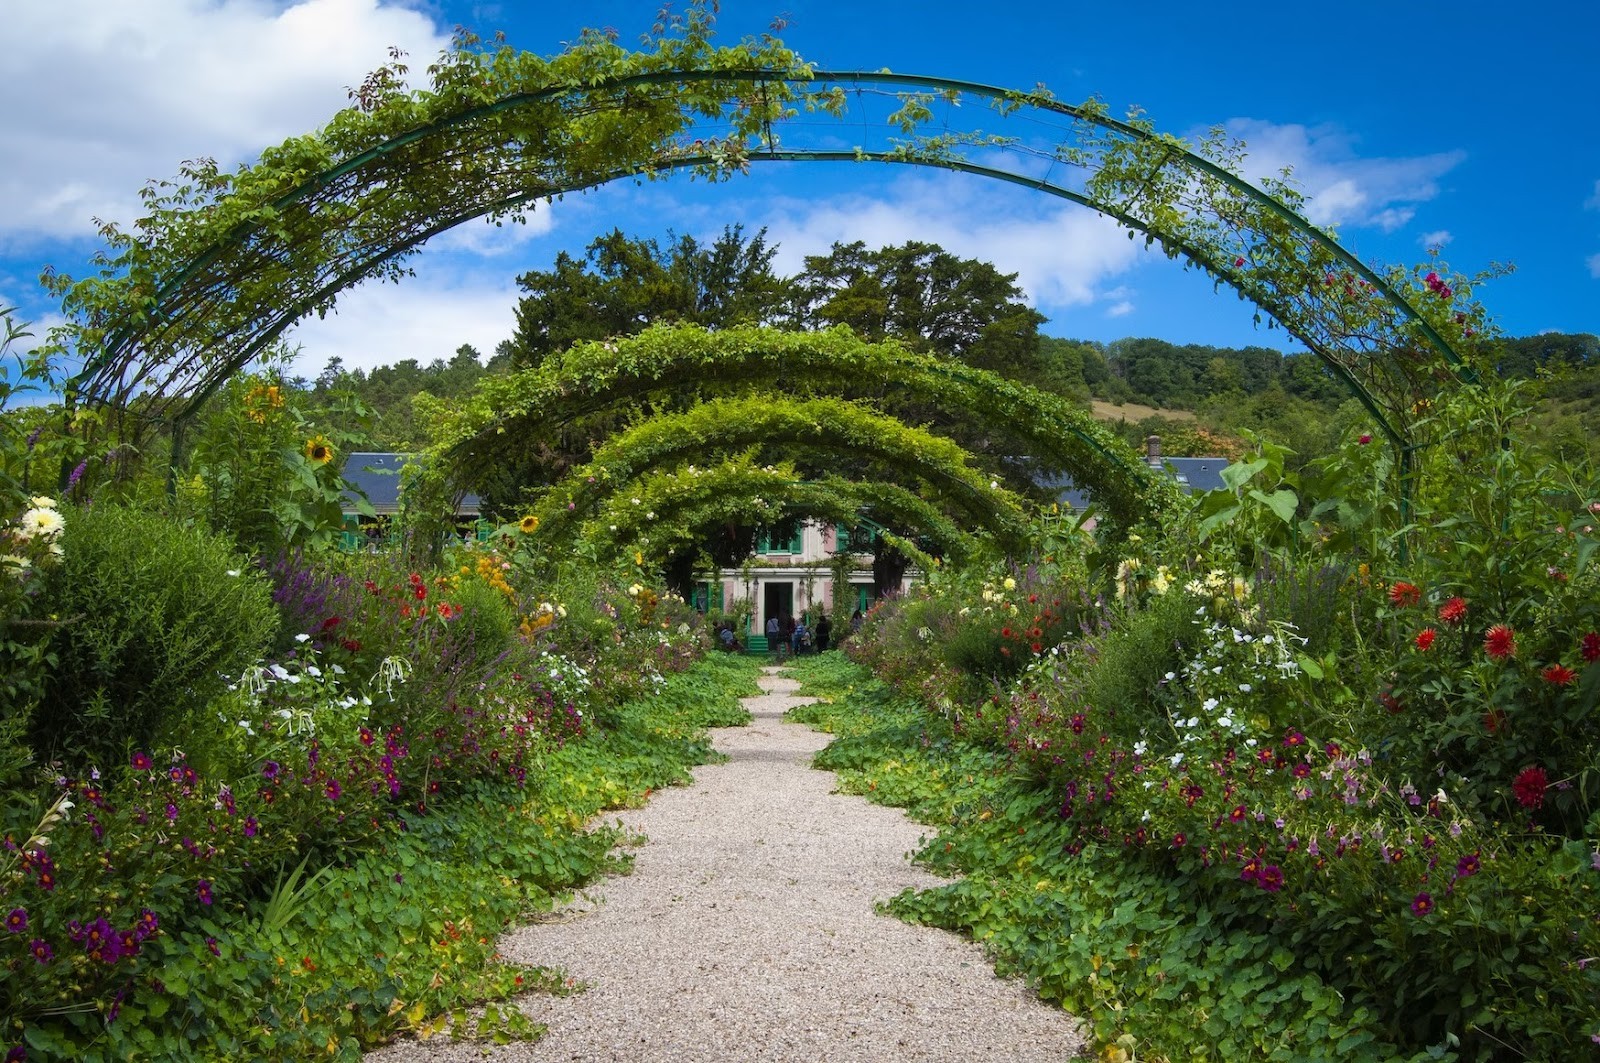 A wide garden path with arches overhead that have plants growing across them. The path is lined with colourful flowering plants.